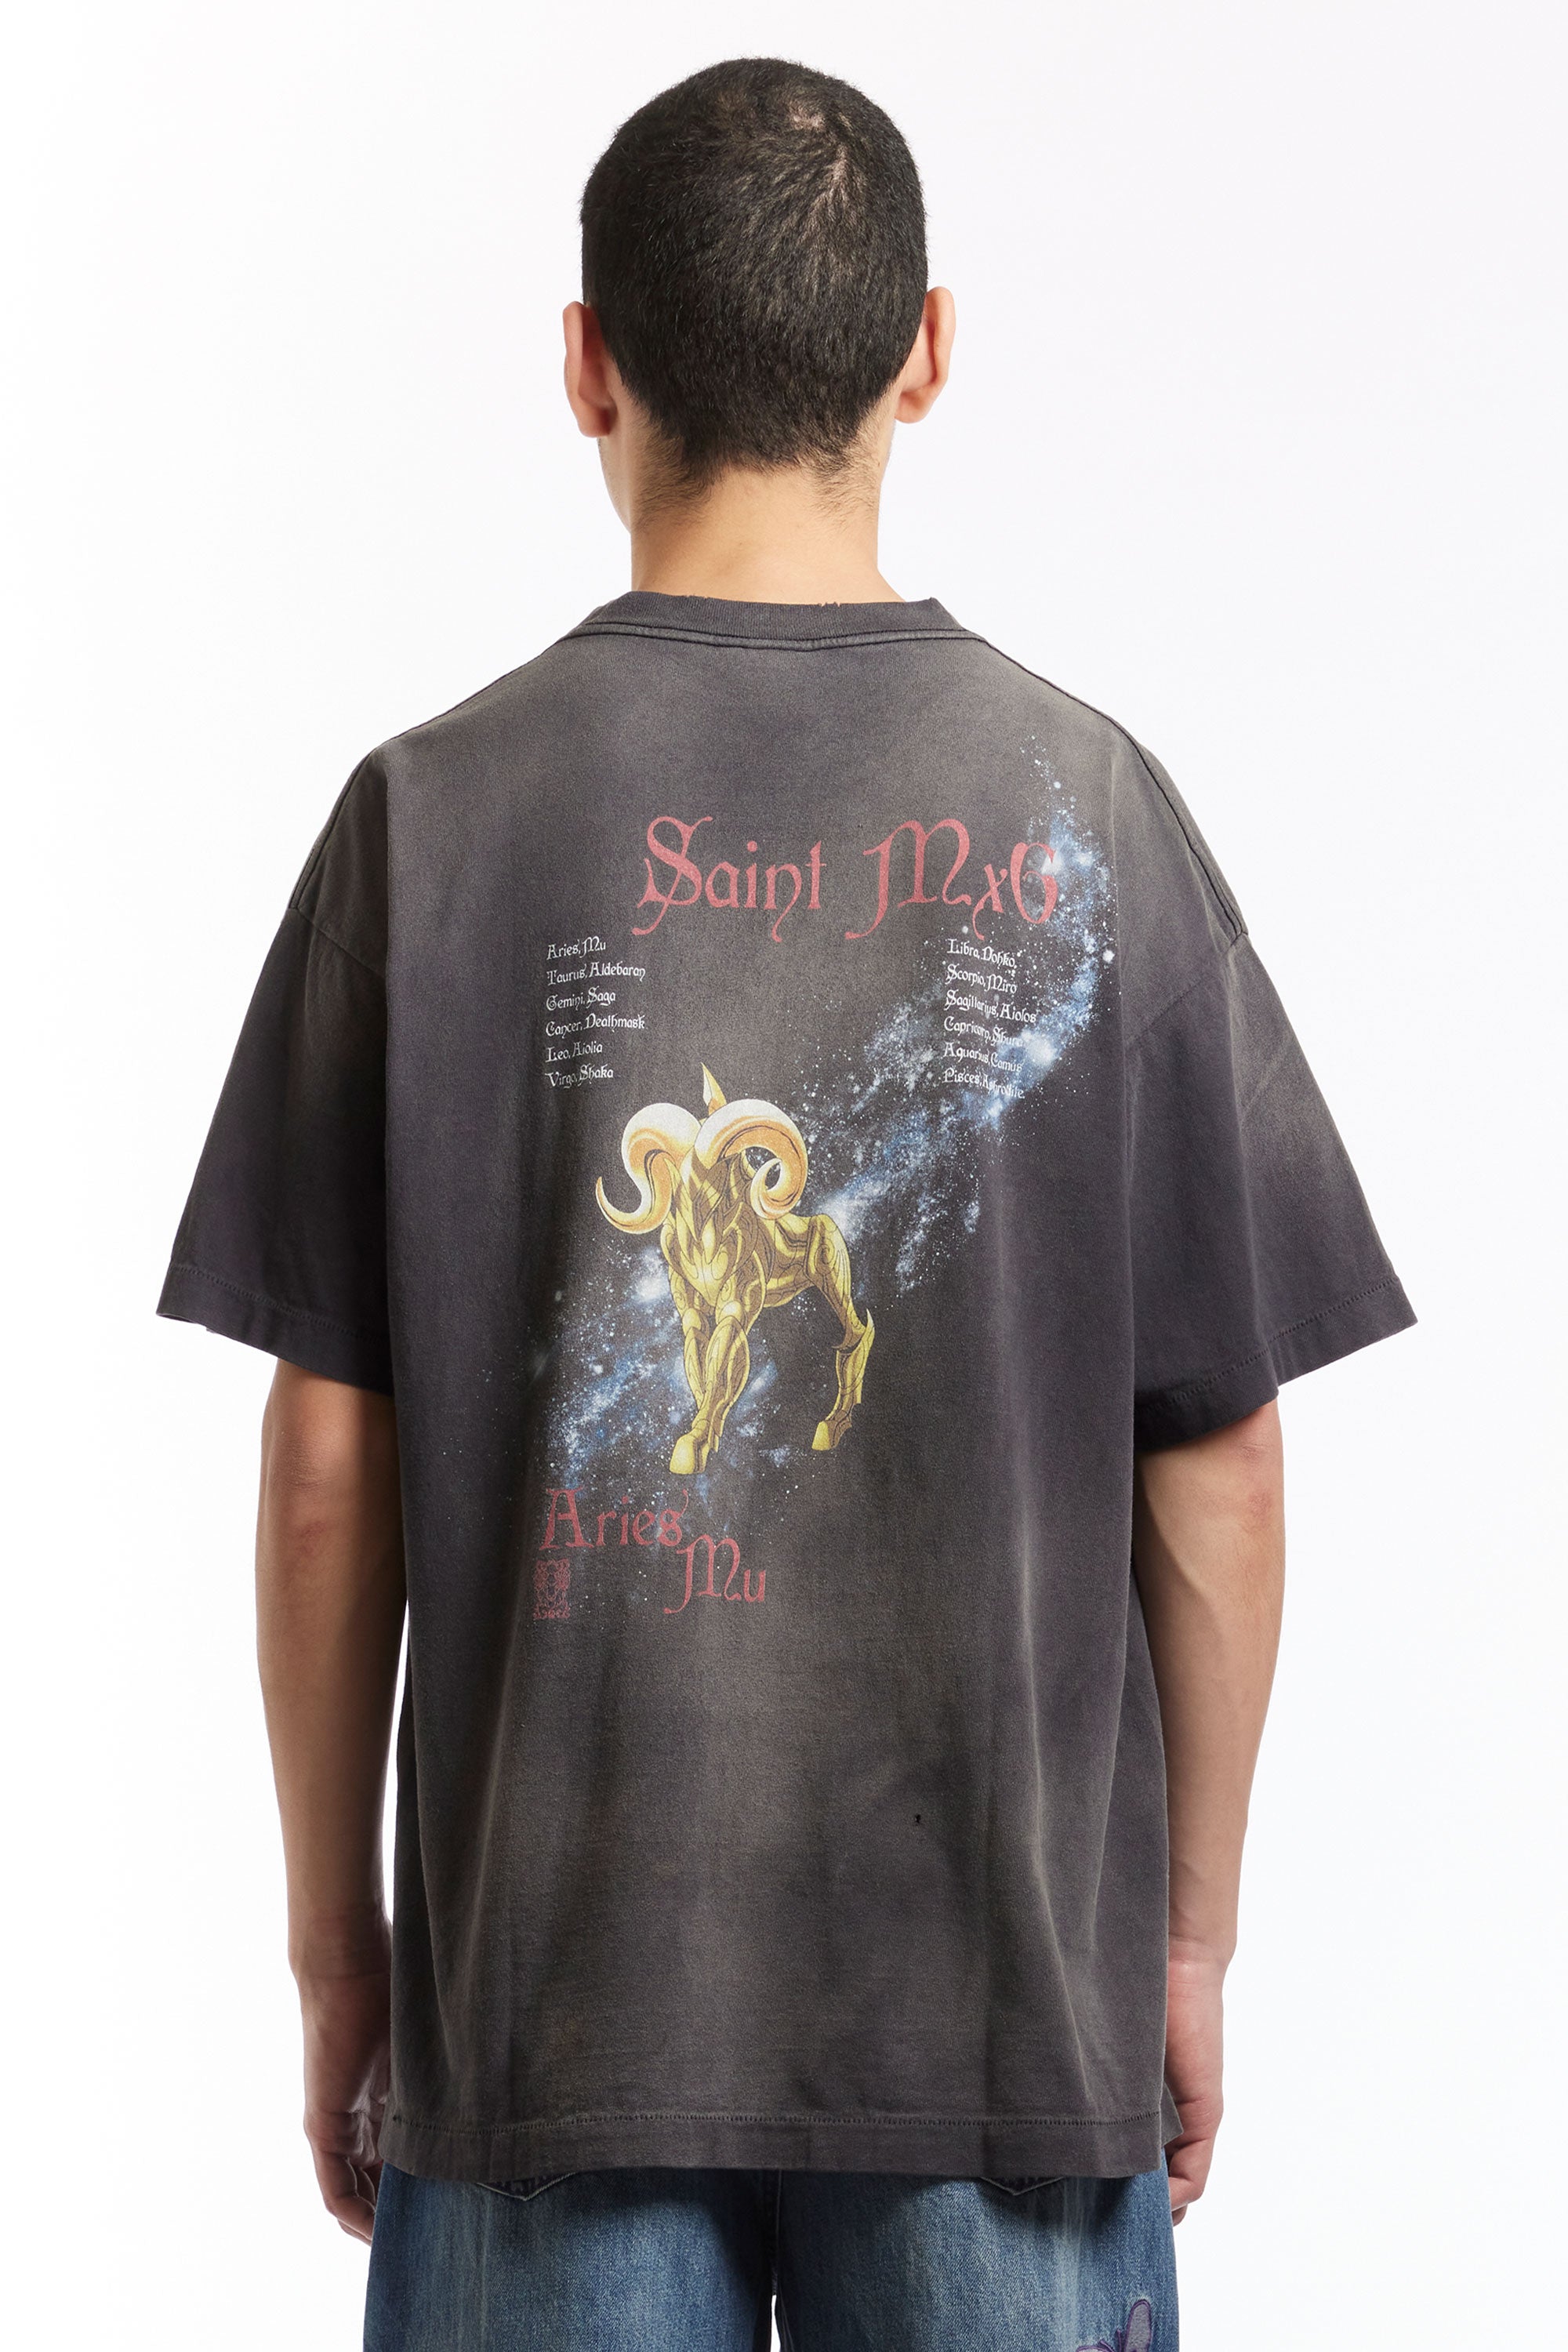 The ST MXXXXXX - SAINT SEIYA MU SS TEE  available online with global shipping, and in PAM Stores Melbourne and Sydney.